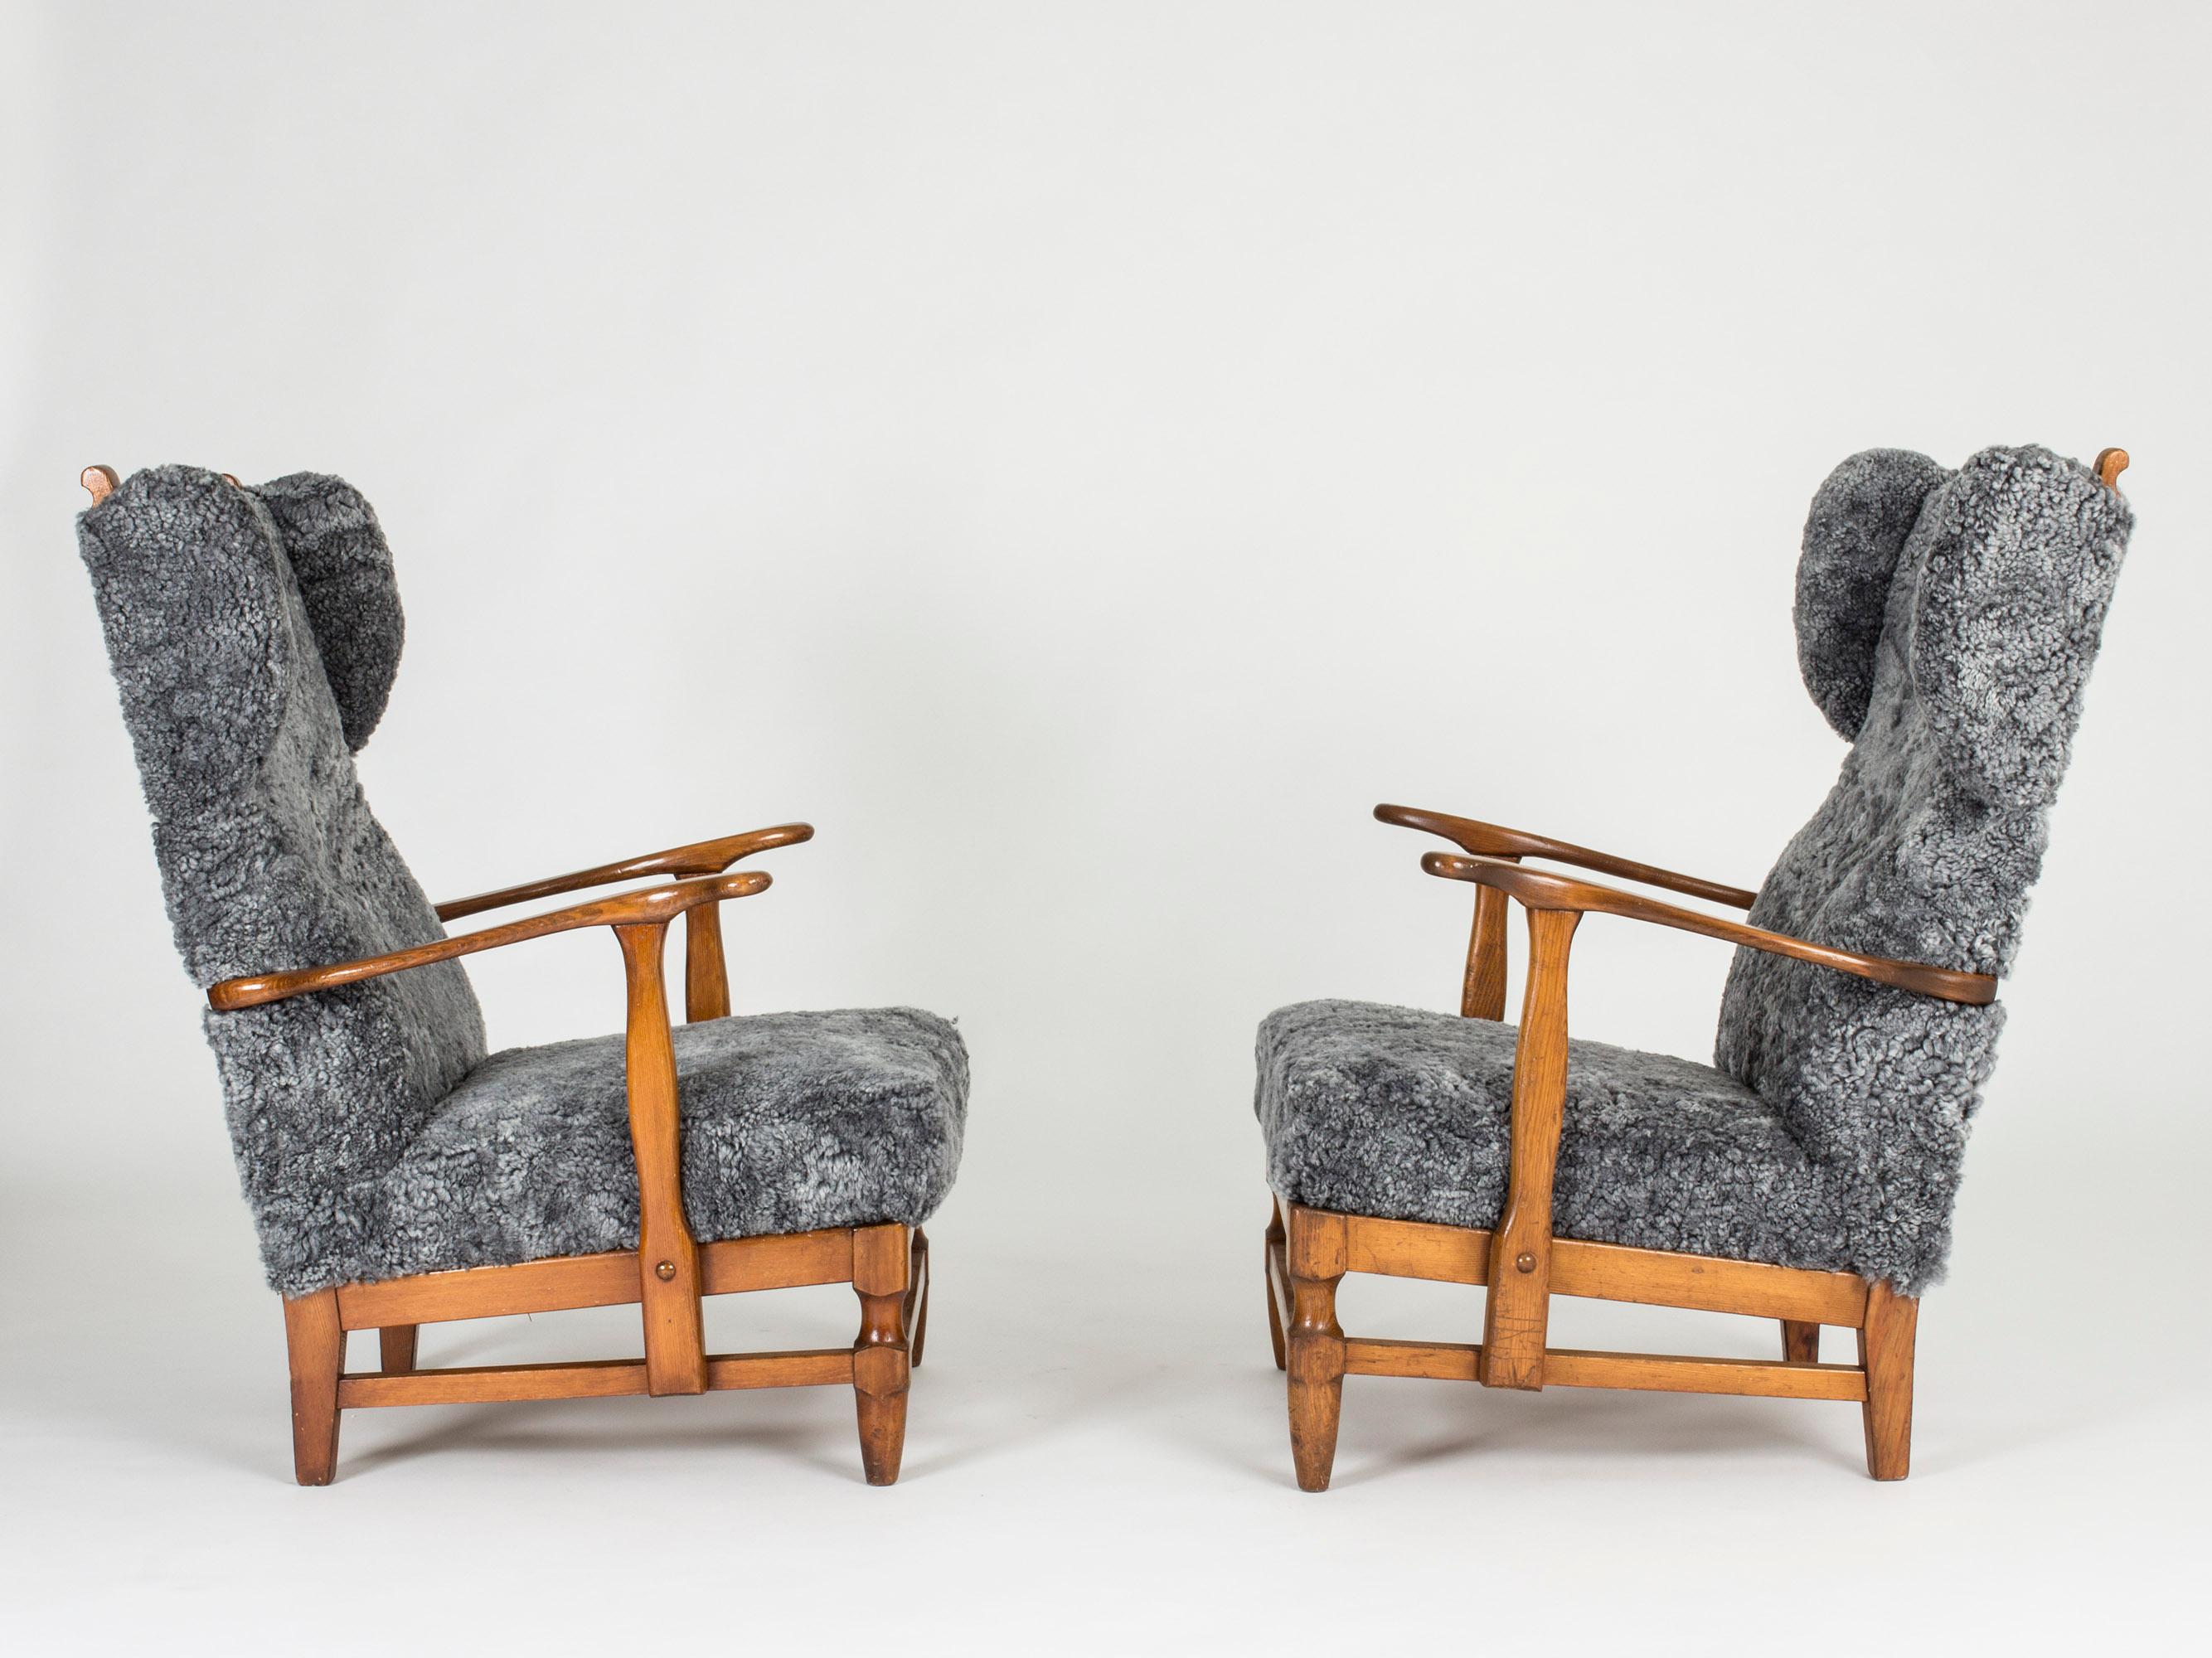 Pair of stout and elegant lounge chairs by Gunnar Göperts. Stained pine frame with beautiful, rustic details and grey sheepskin upholstery.